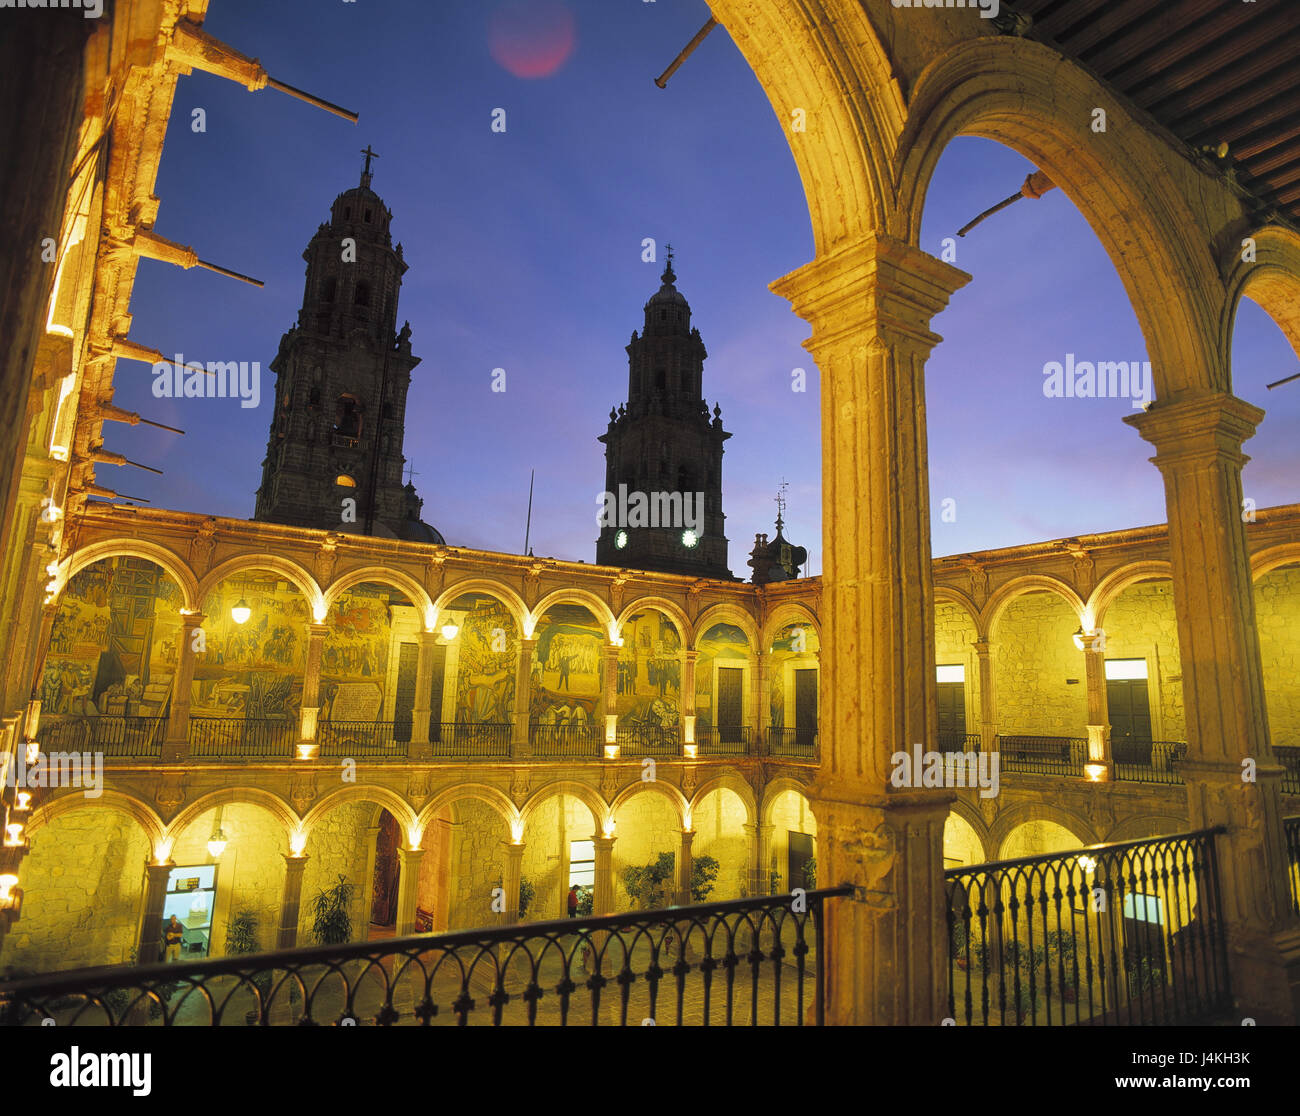 Mexico, Michoacan State, Morelia, Palacio del Gobierno, cathedral, detail, night structure, architecture, building, lighting, inner courtyard, arcades, tuning, evening tuning, round arches, inner courtyard Stock Photo